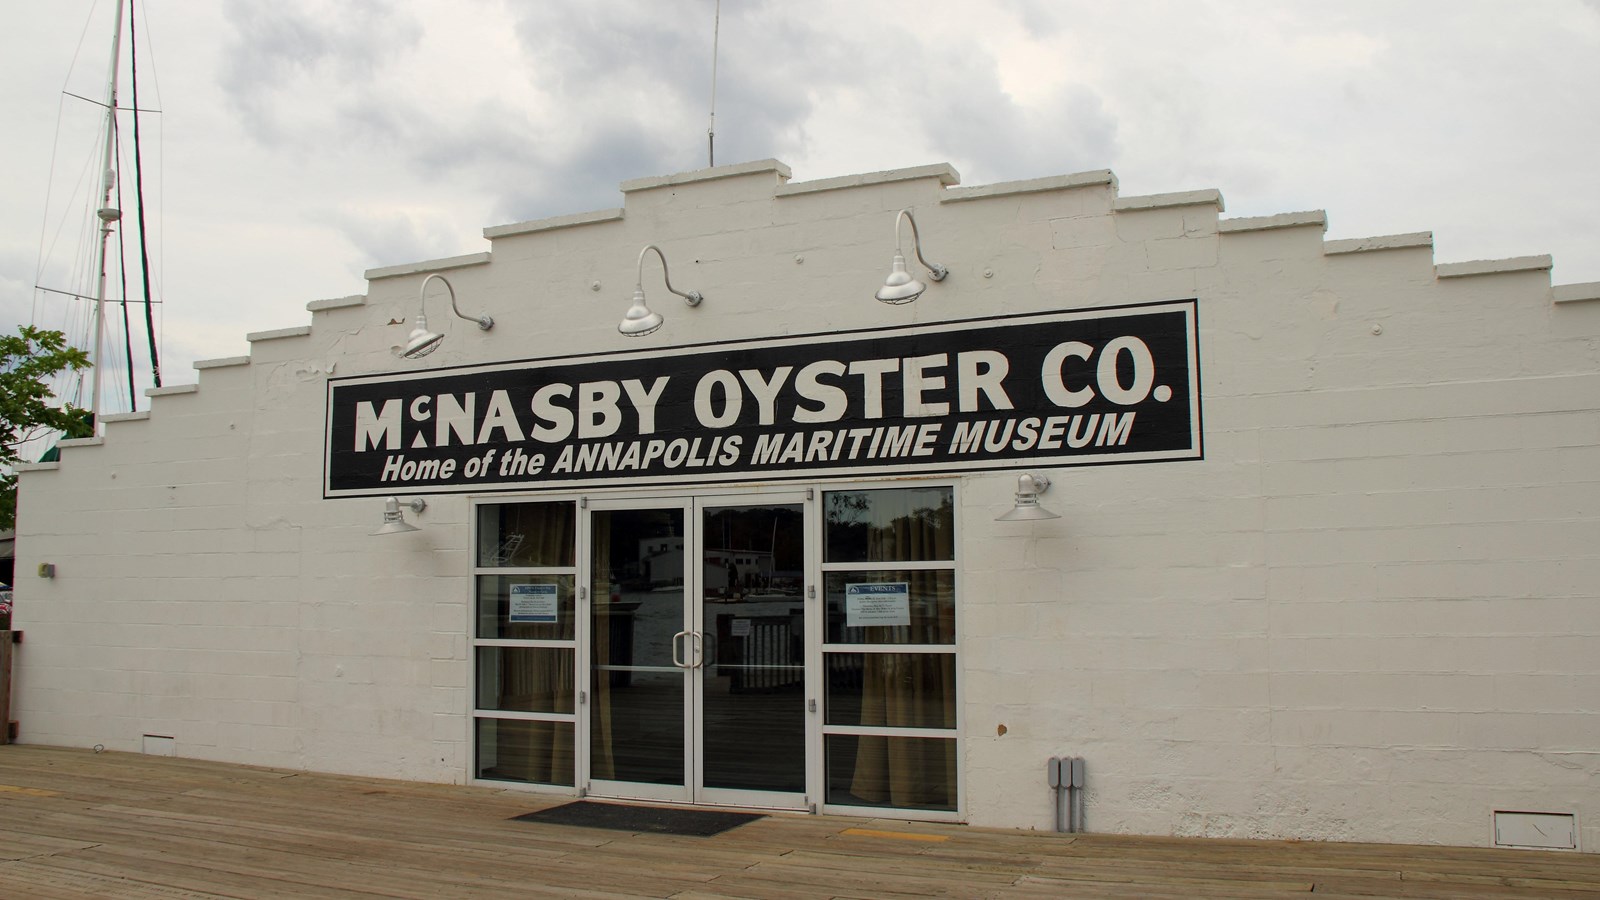 White exterior of the museum with the name of the old oyster cannery that it was home to.